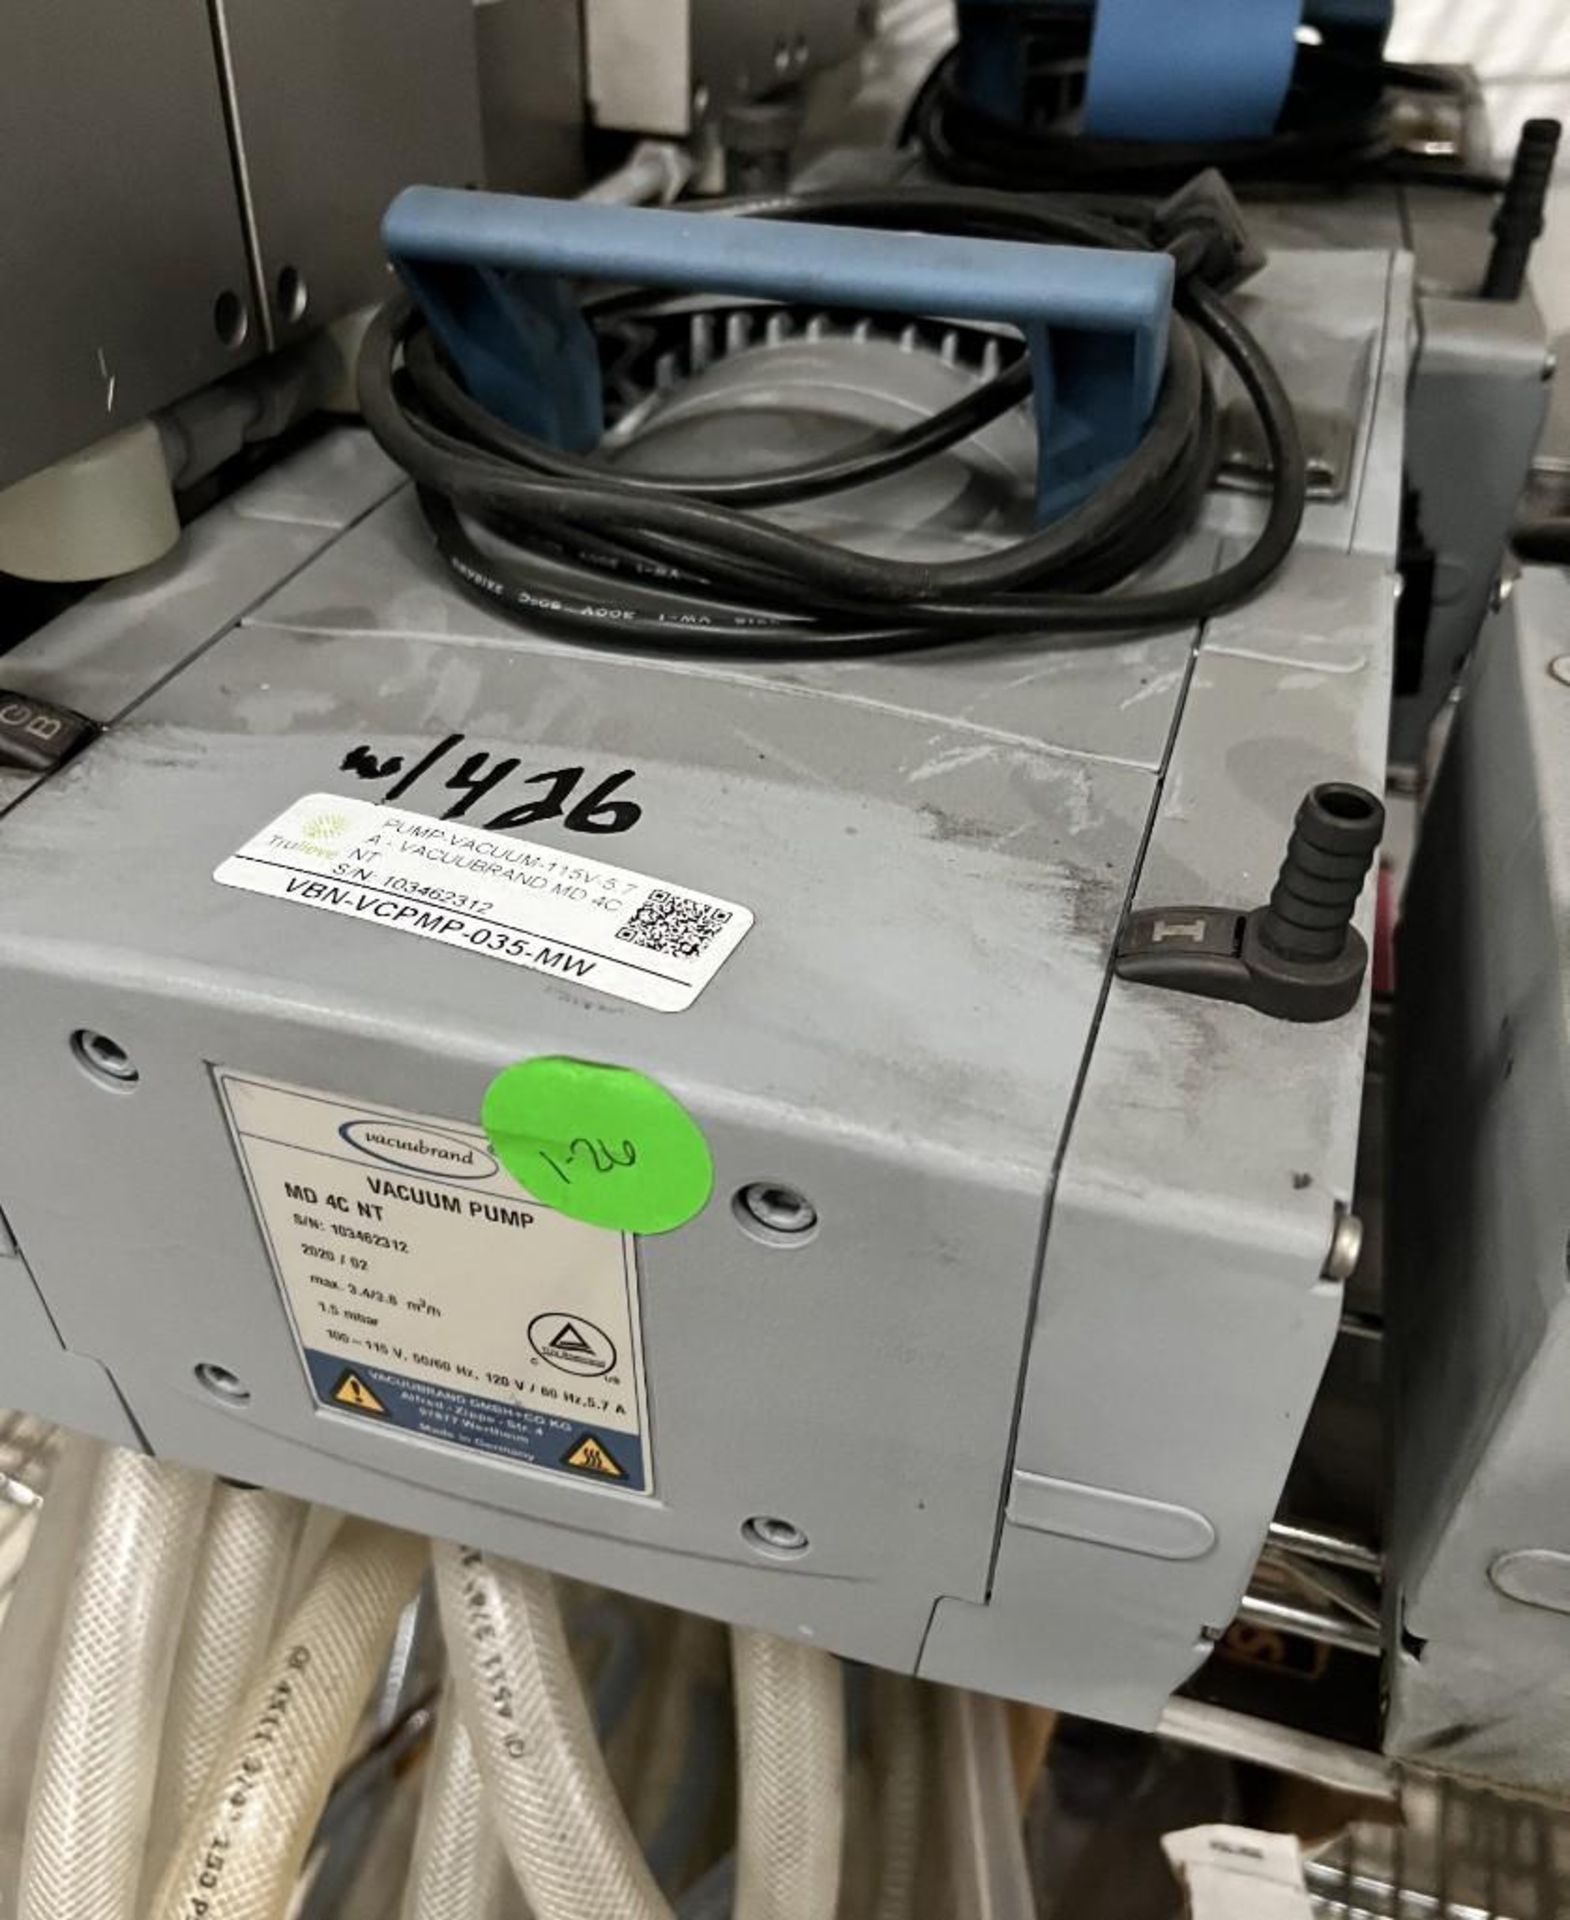 Lot Of (5) Vacuum Pumps. With (3) Vacuubrand model MD-4C-NT, Serial# 103261009, 103462312, 103346605 - Image 4 of 11